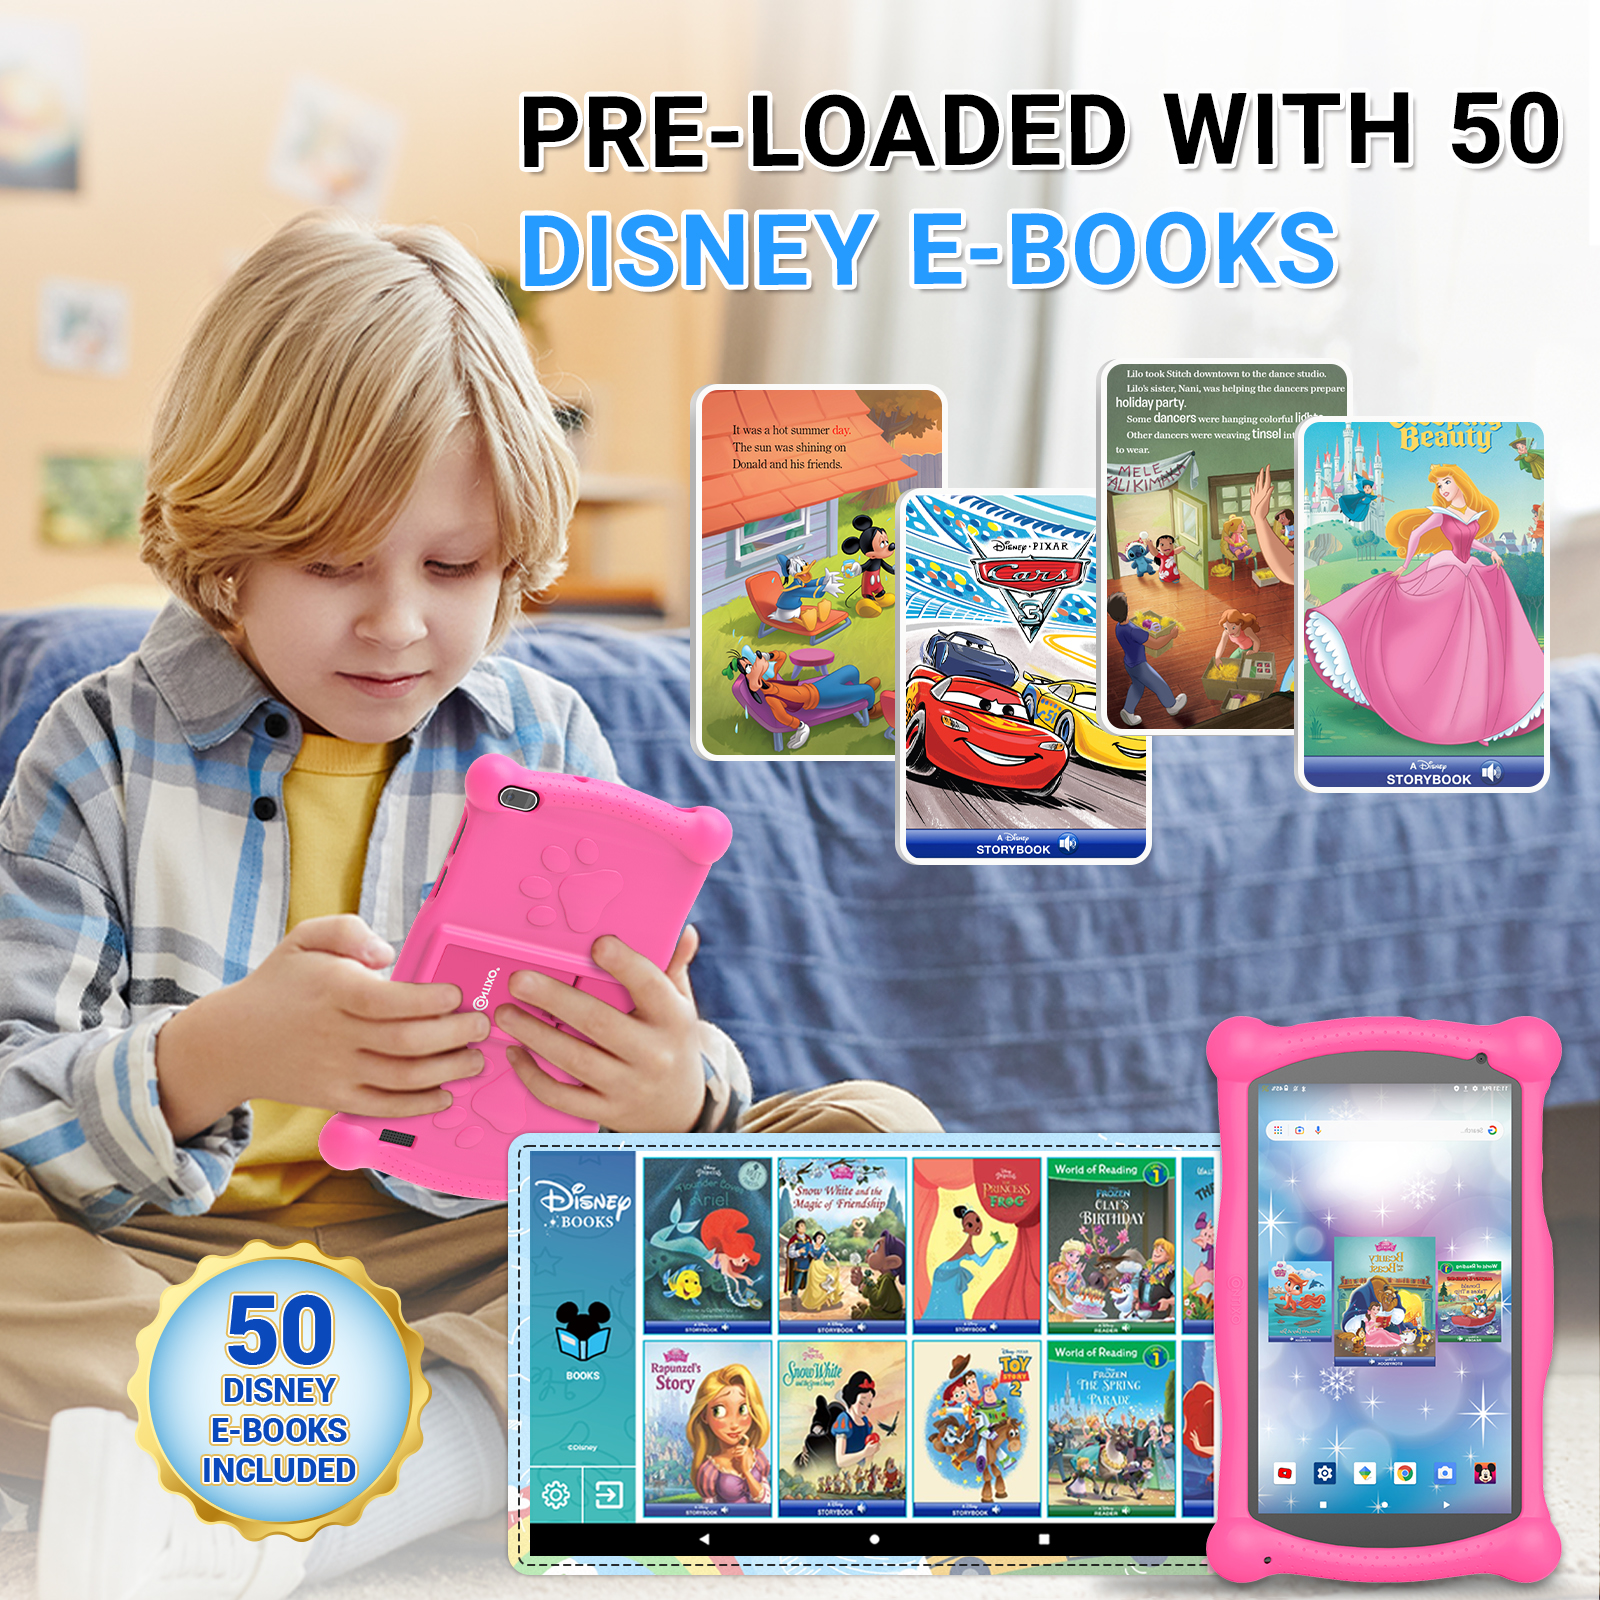 Contixo V10 7" Kids Tablet, with Headphone and Tablet Bag Bundle, 32GB Storage, 50+ Disney eBooks, Shockproof Case w/ Kickstand and Stylus - Pink - image 5 of 7